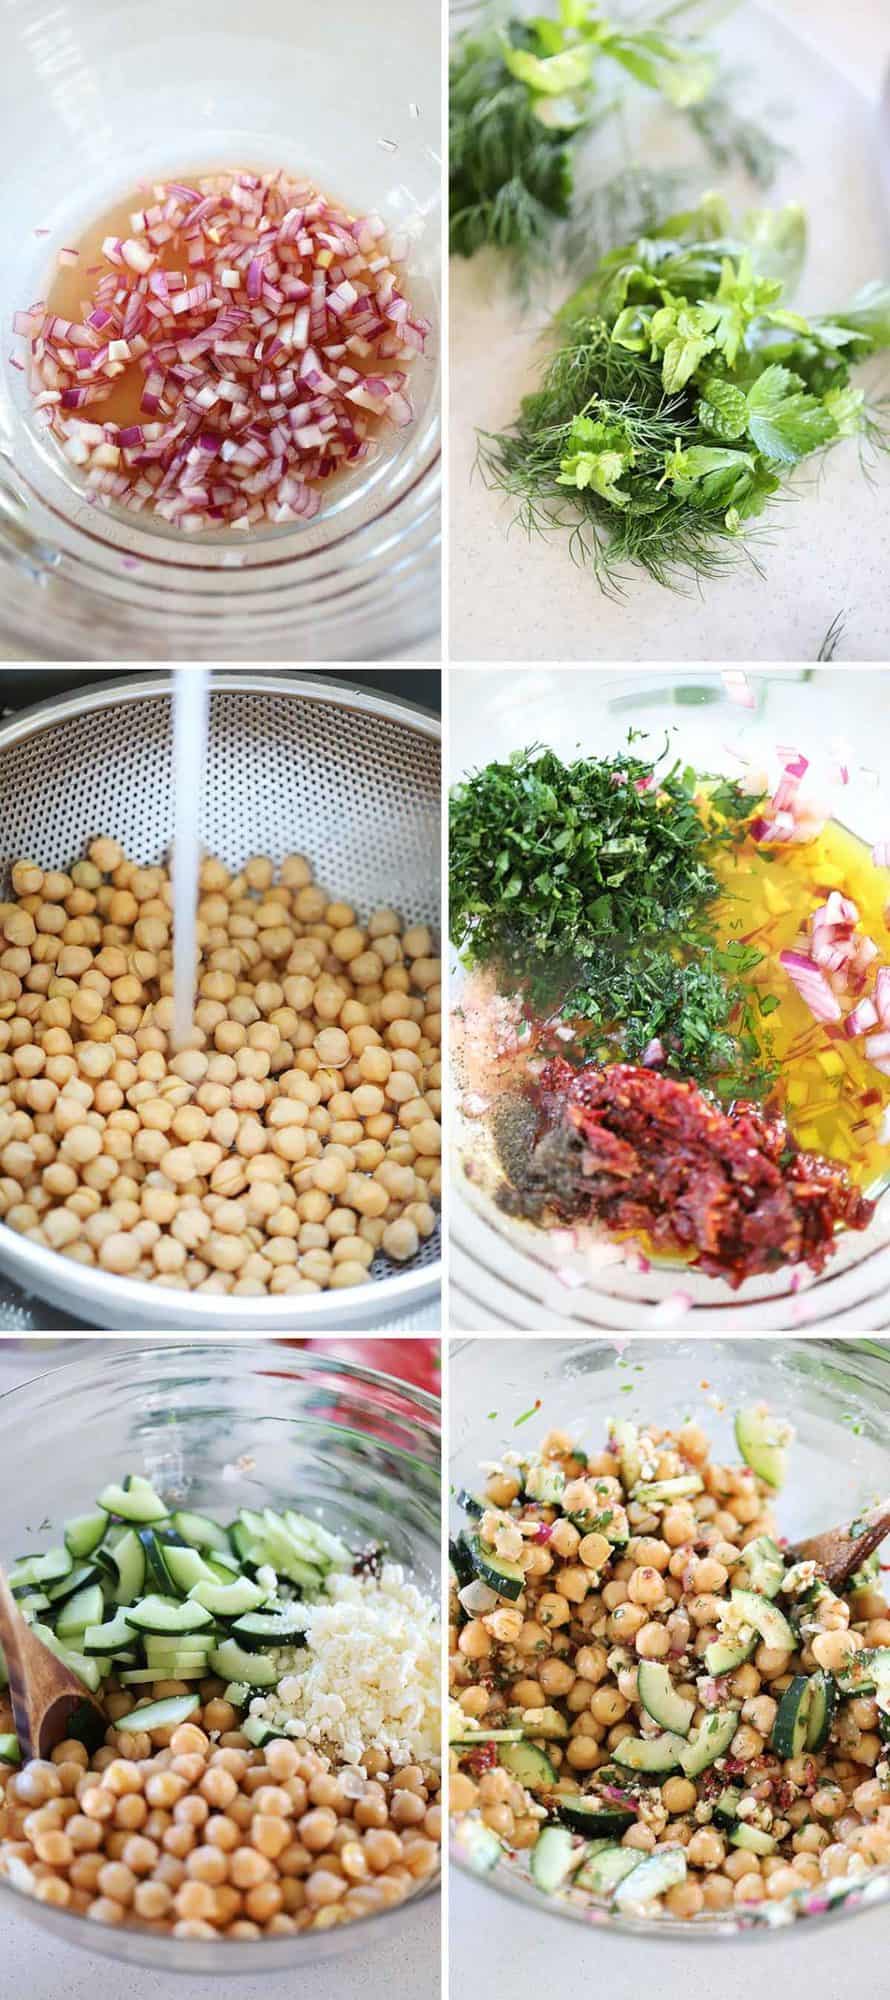 Process collage showing how to make Mediterranean chickpea salad.